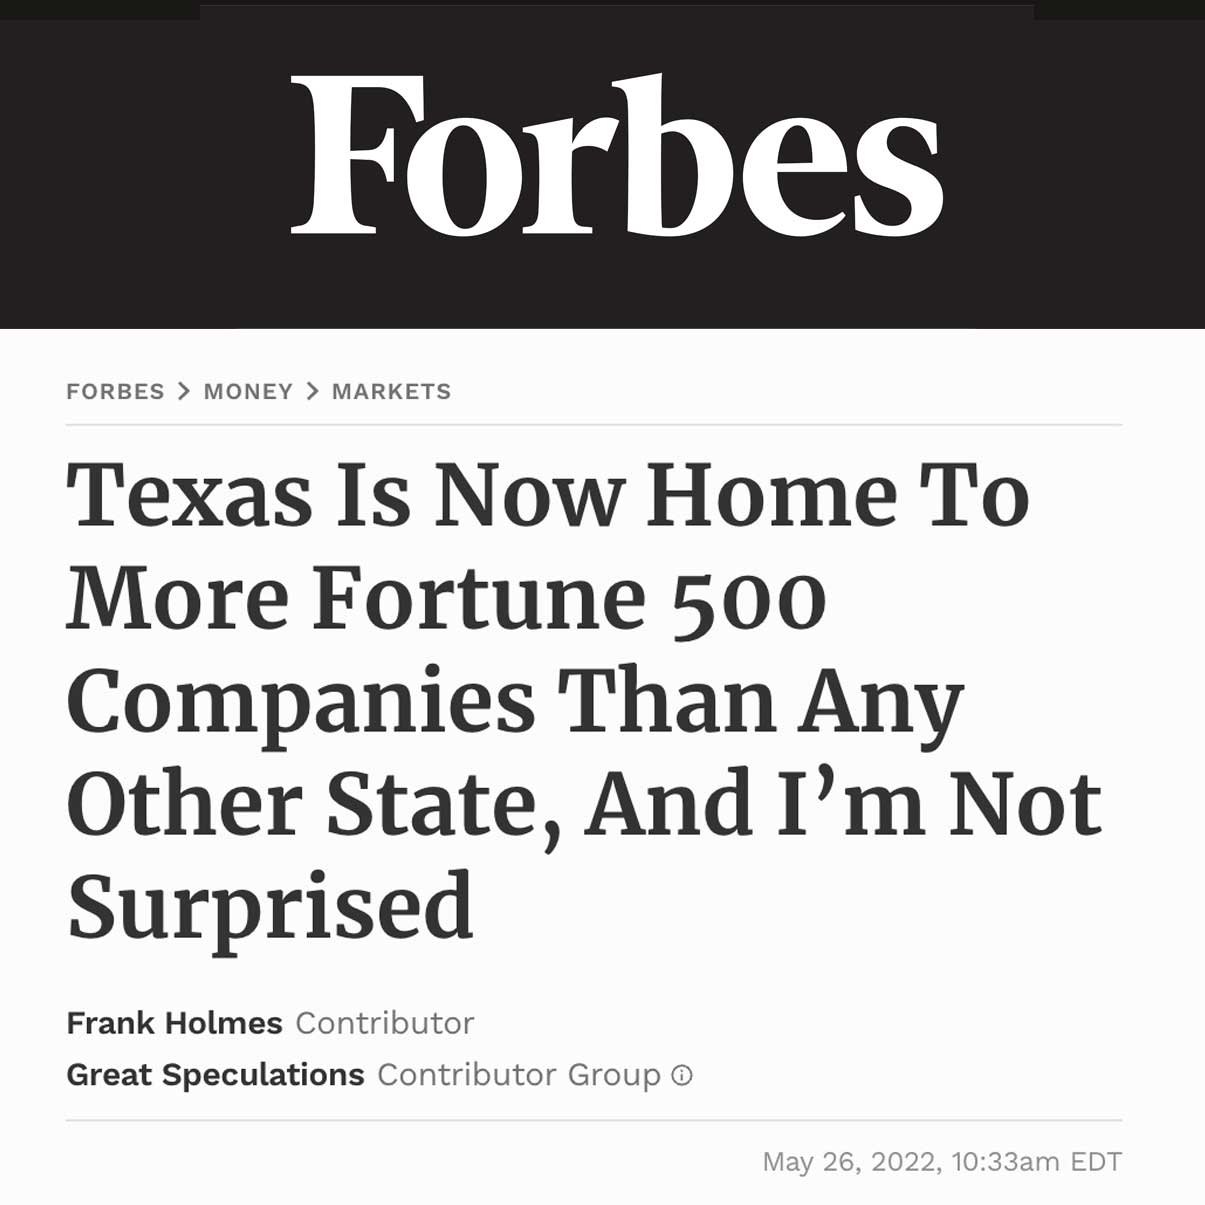 Forbes, Texas is now home to more Fortune 500 companies that any other State